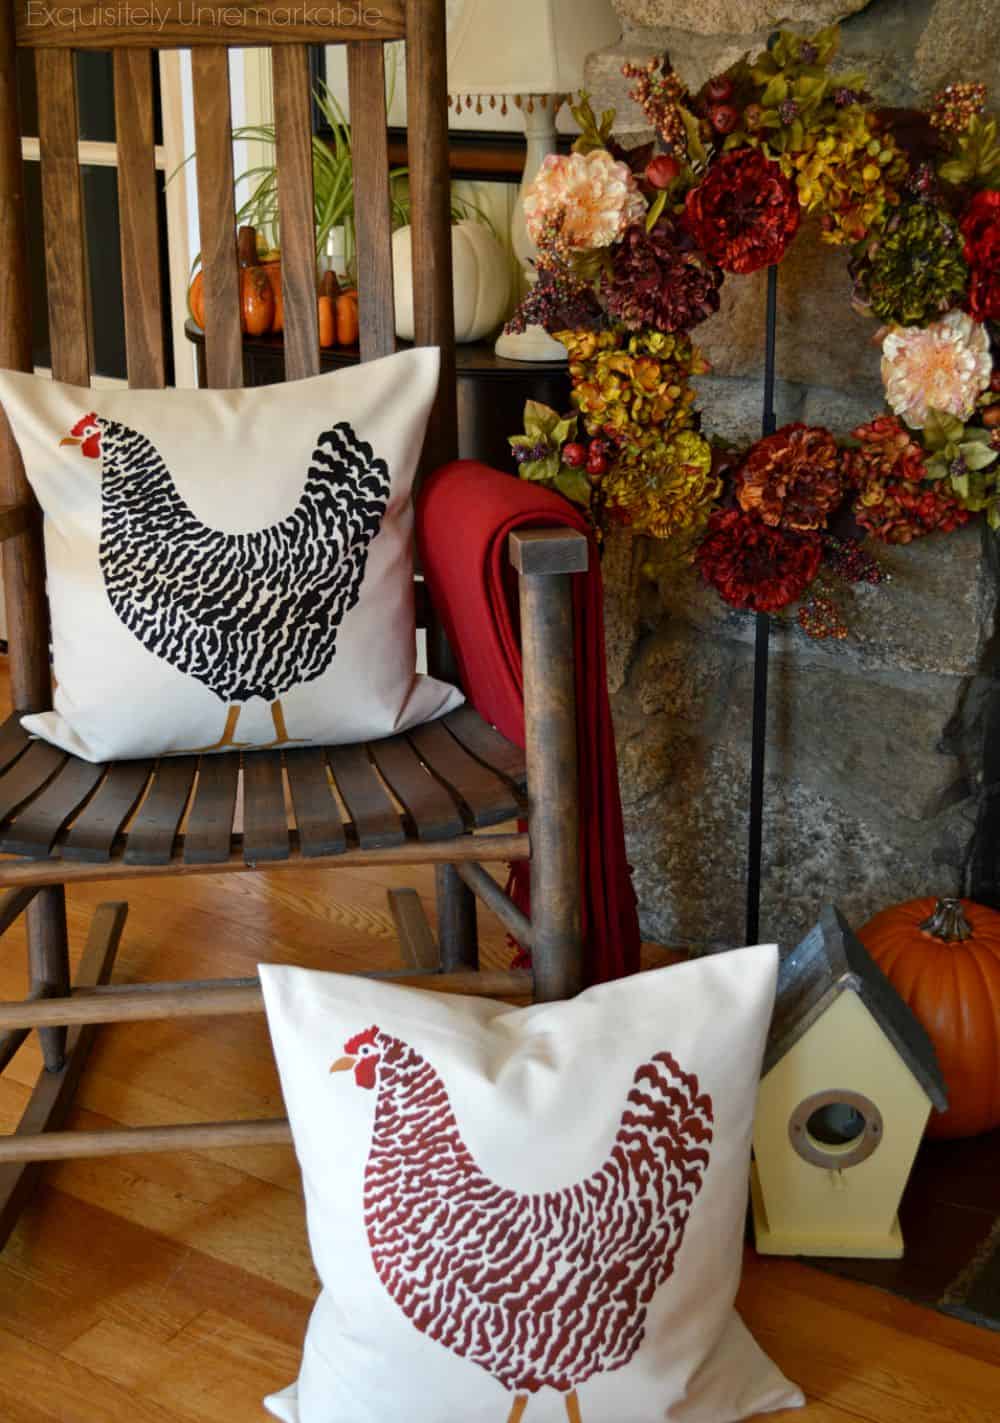 Rooster pillows